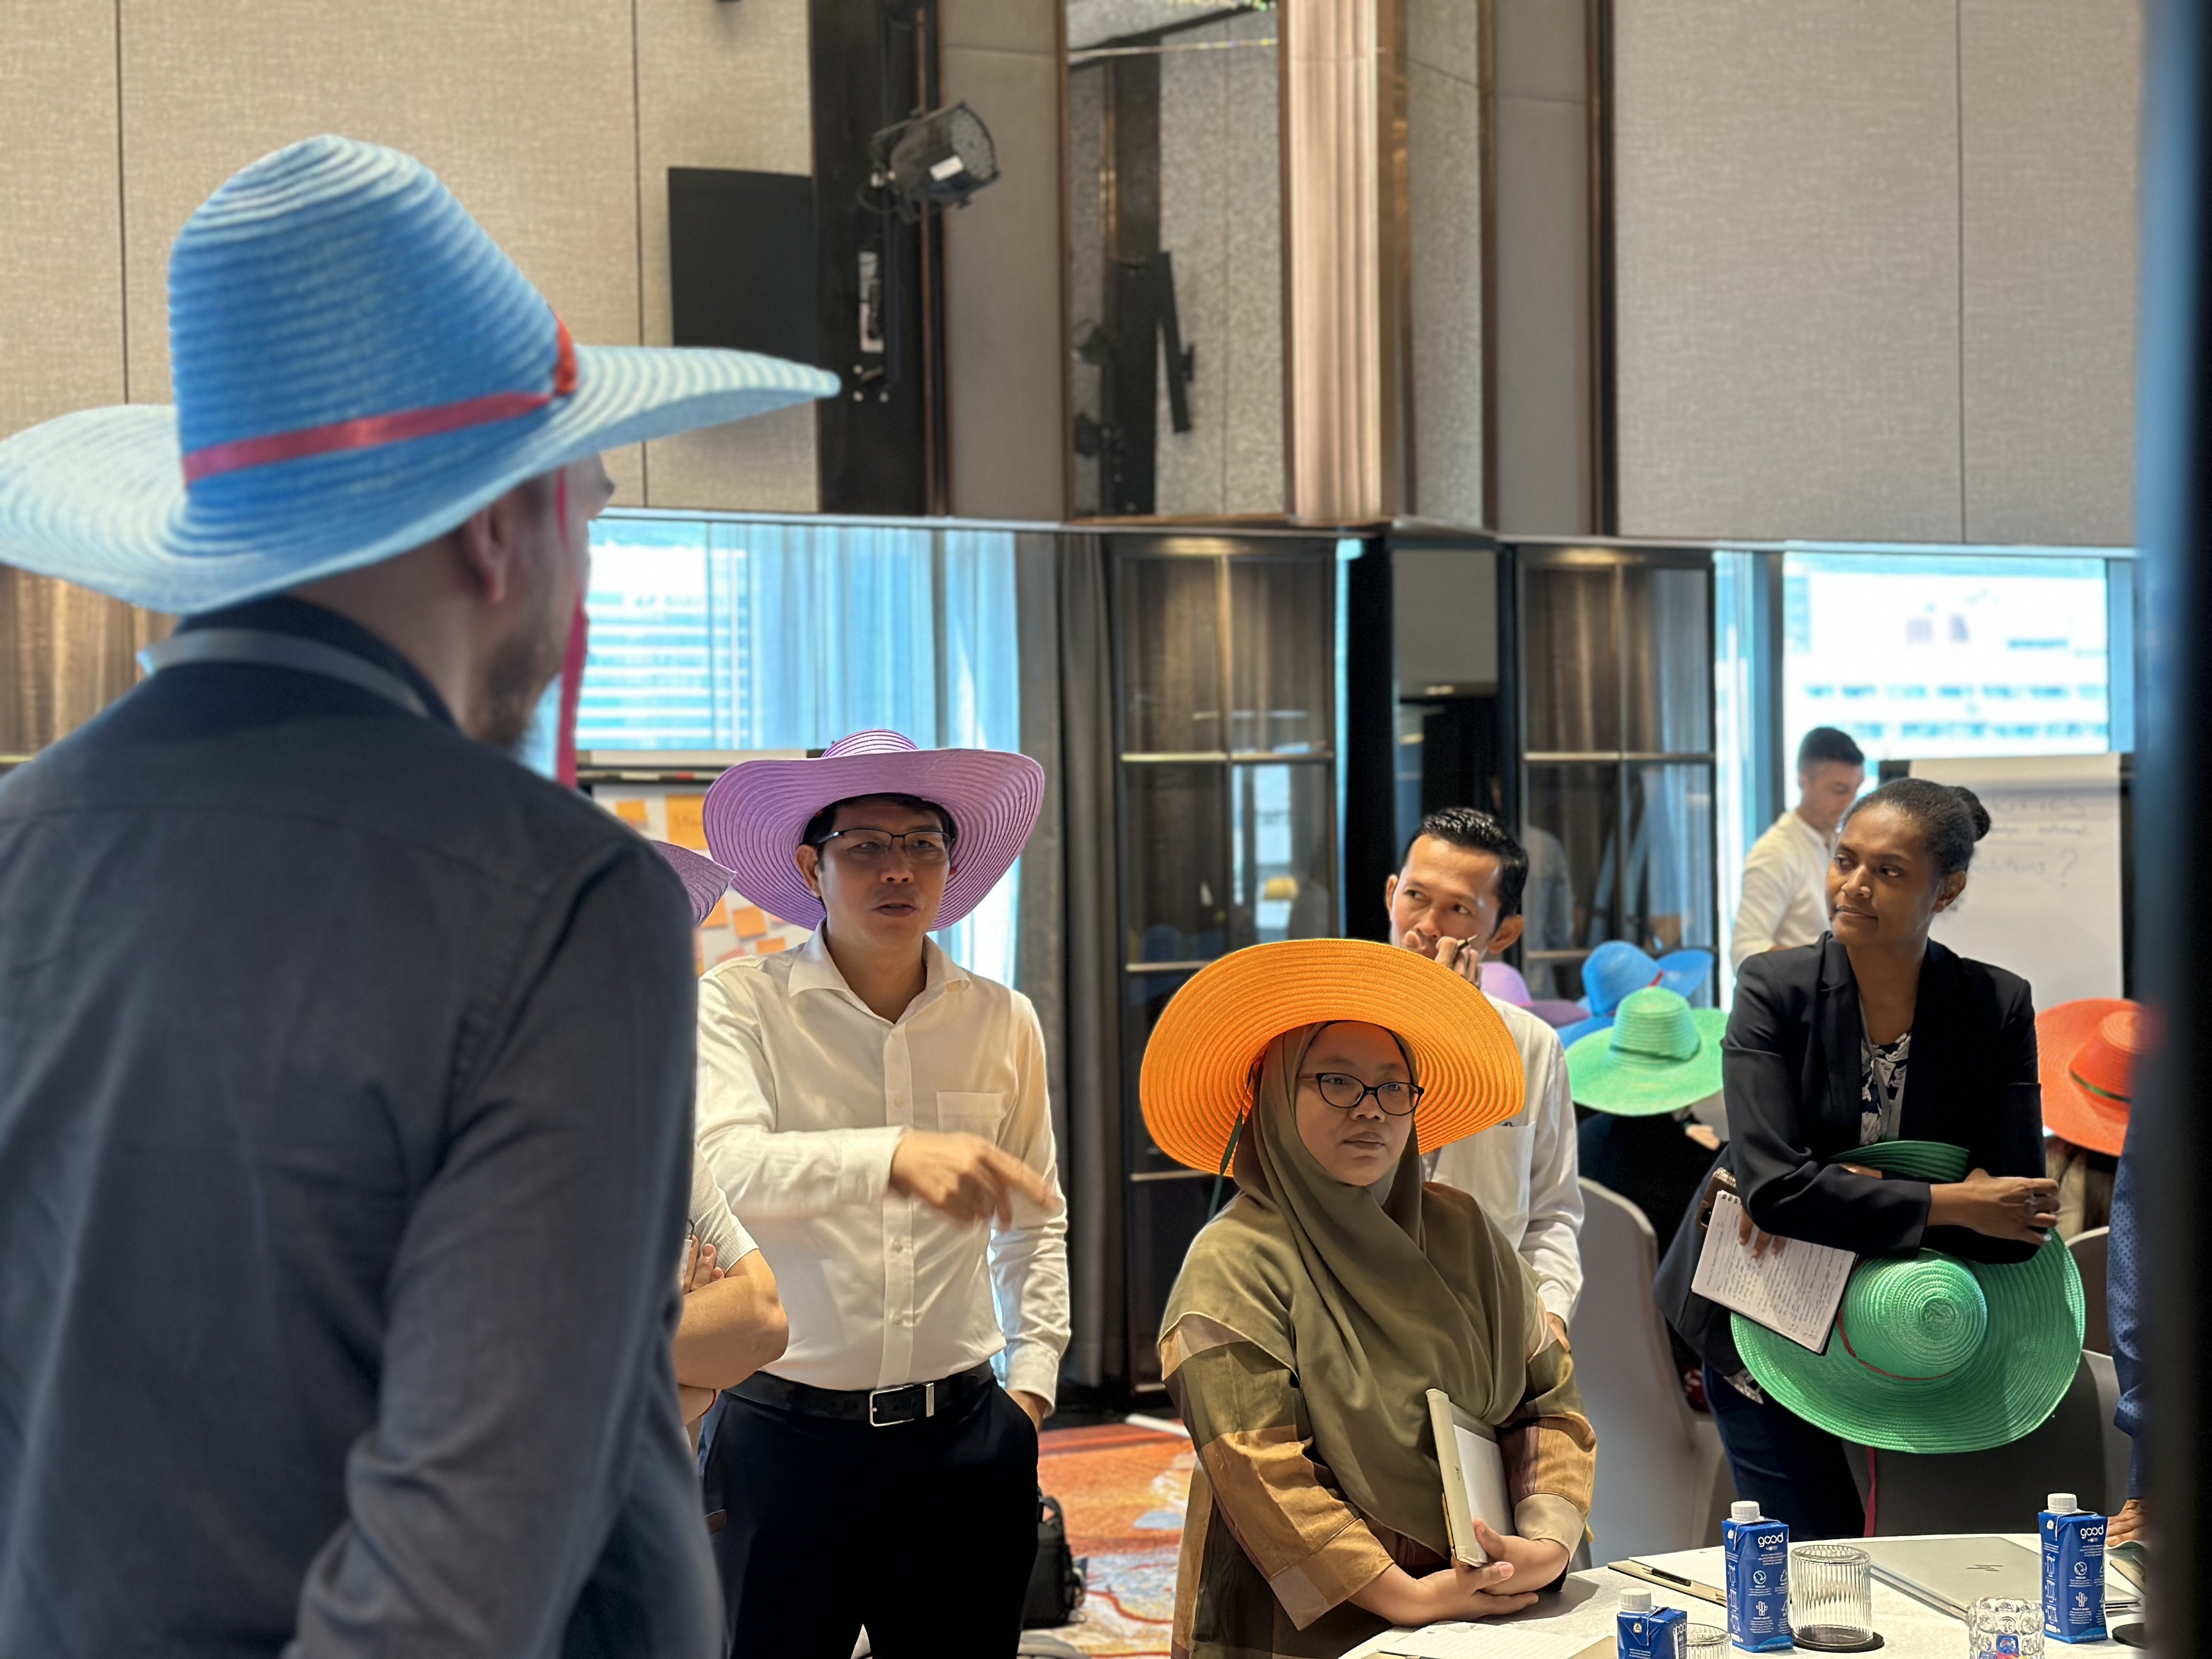 Participants wear colored hats in an exercise named thinking hats